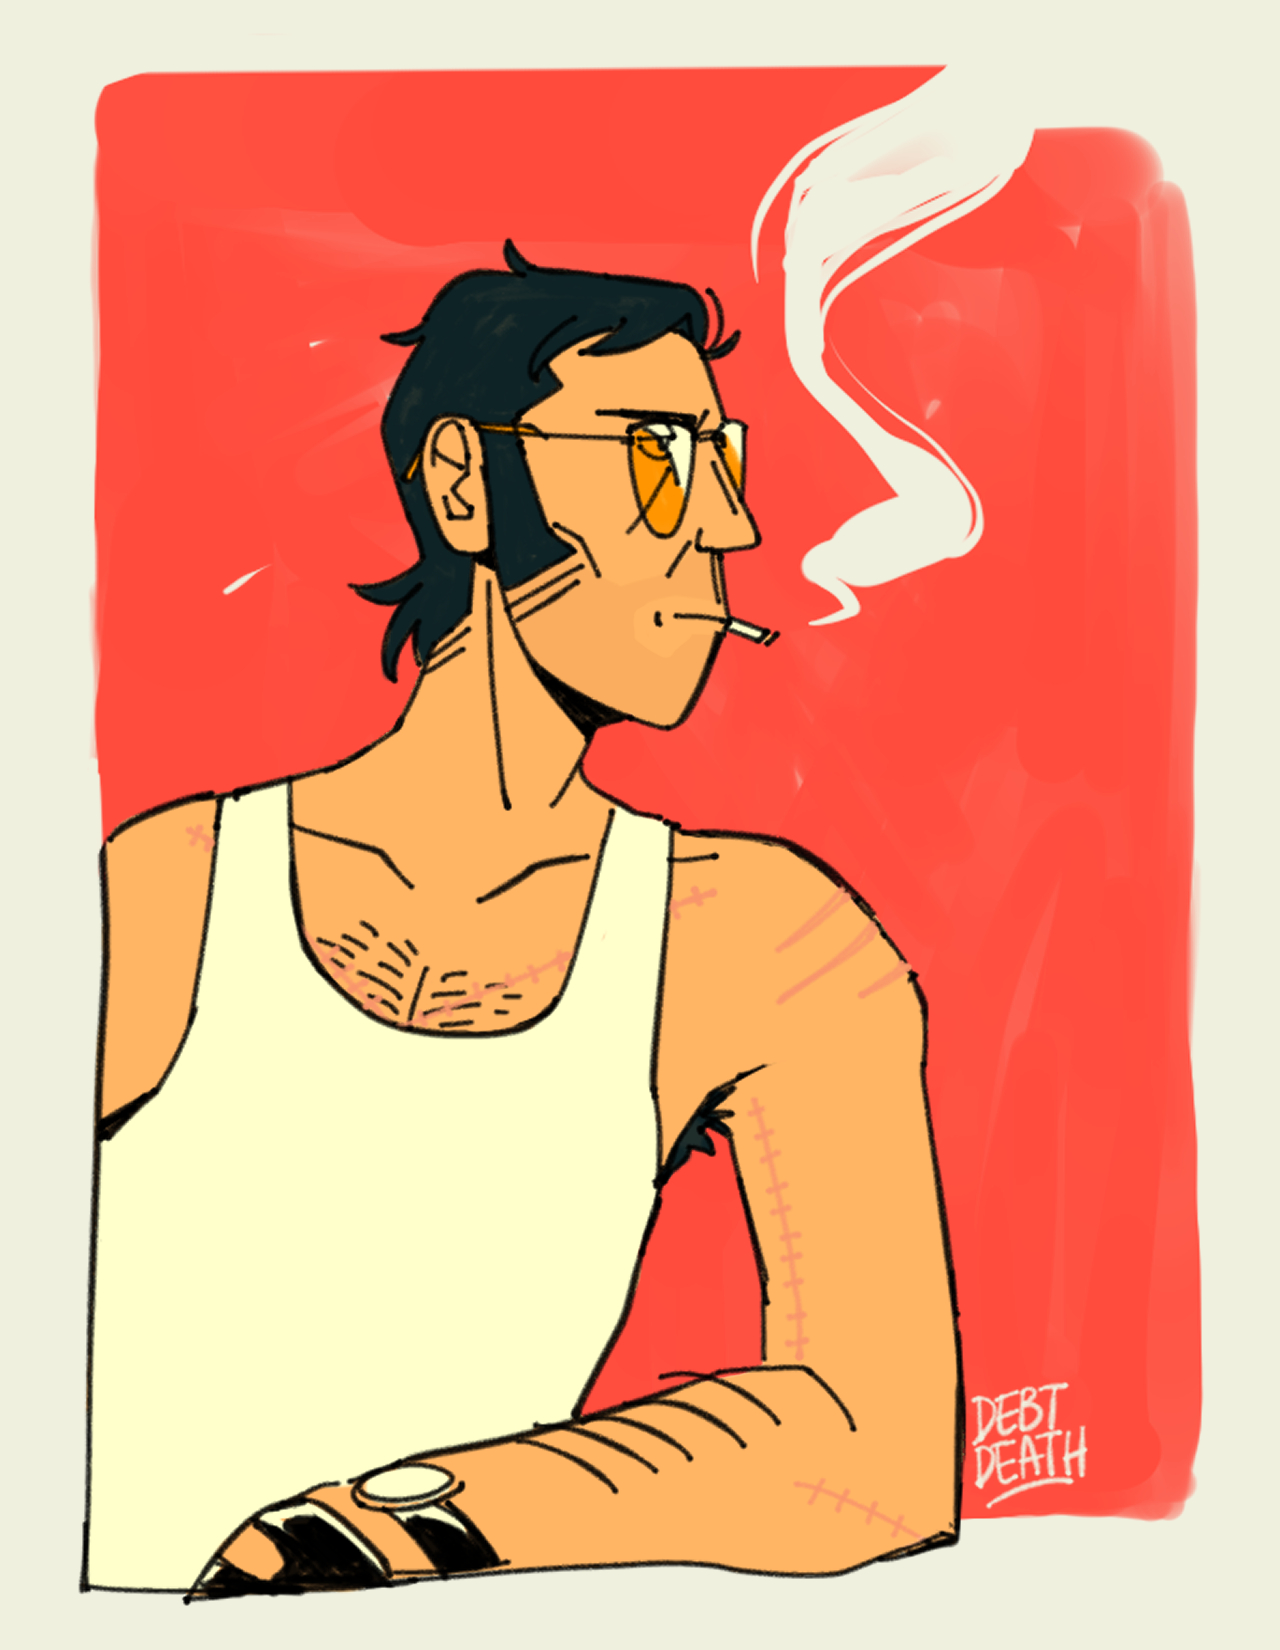 A portrait of Sniper wearing a singlet and smoking.